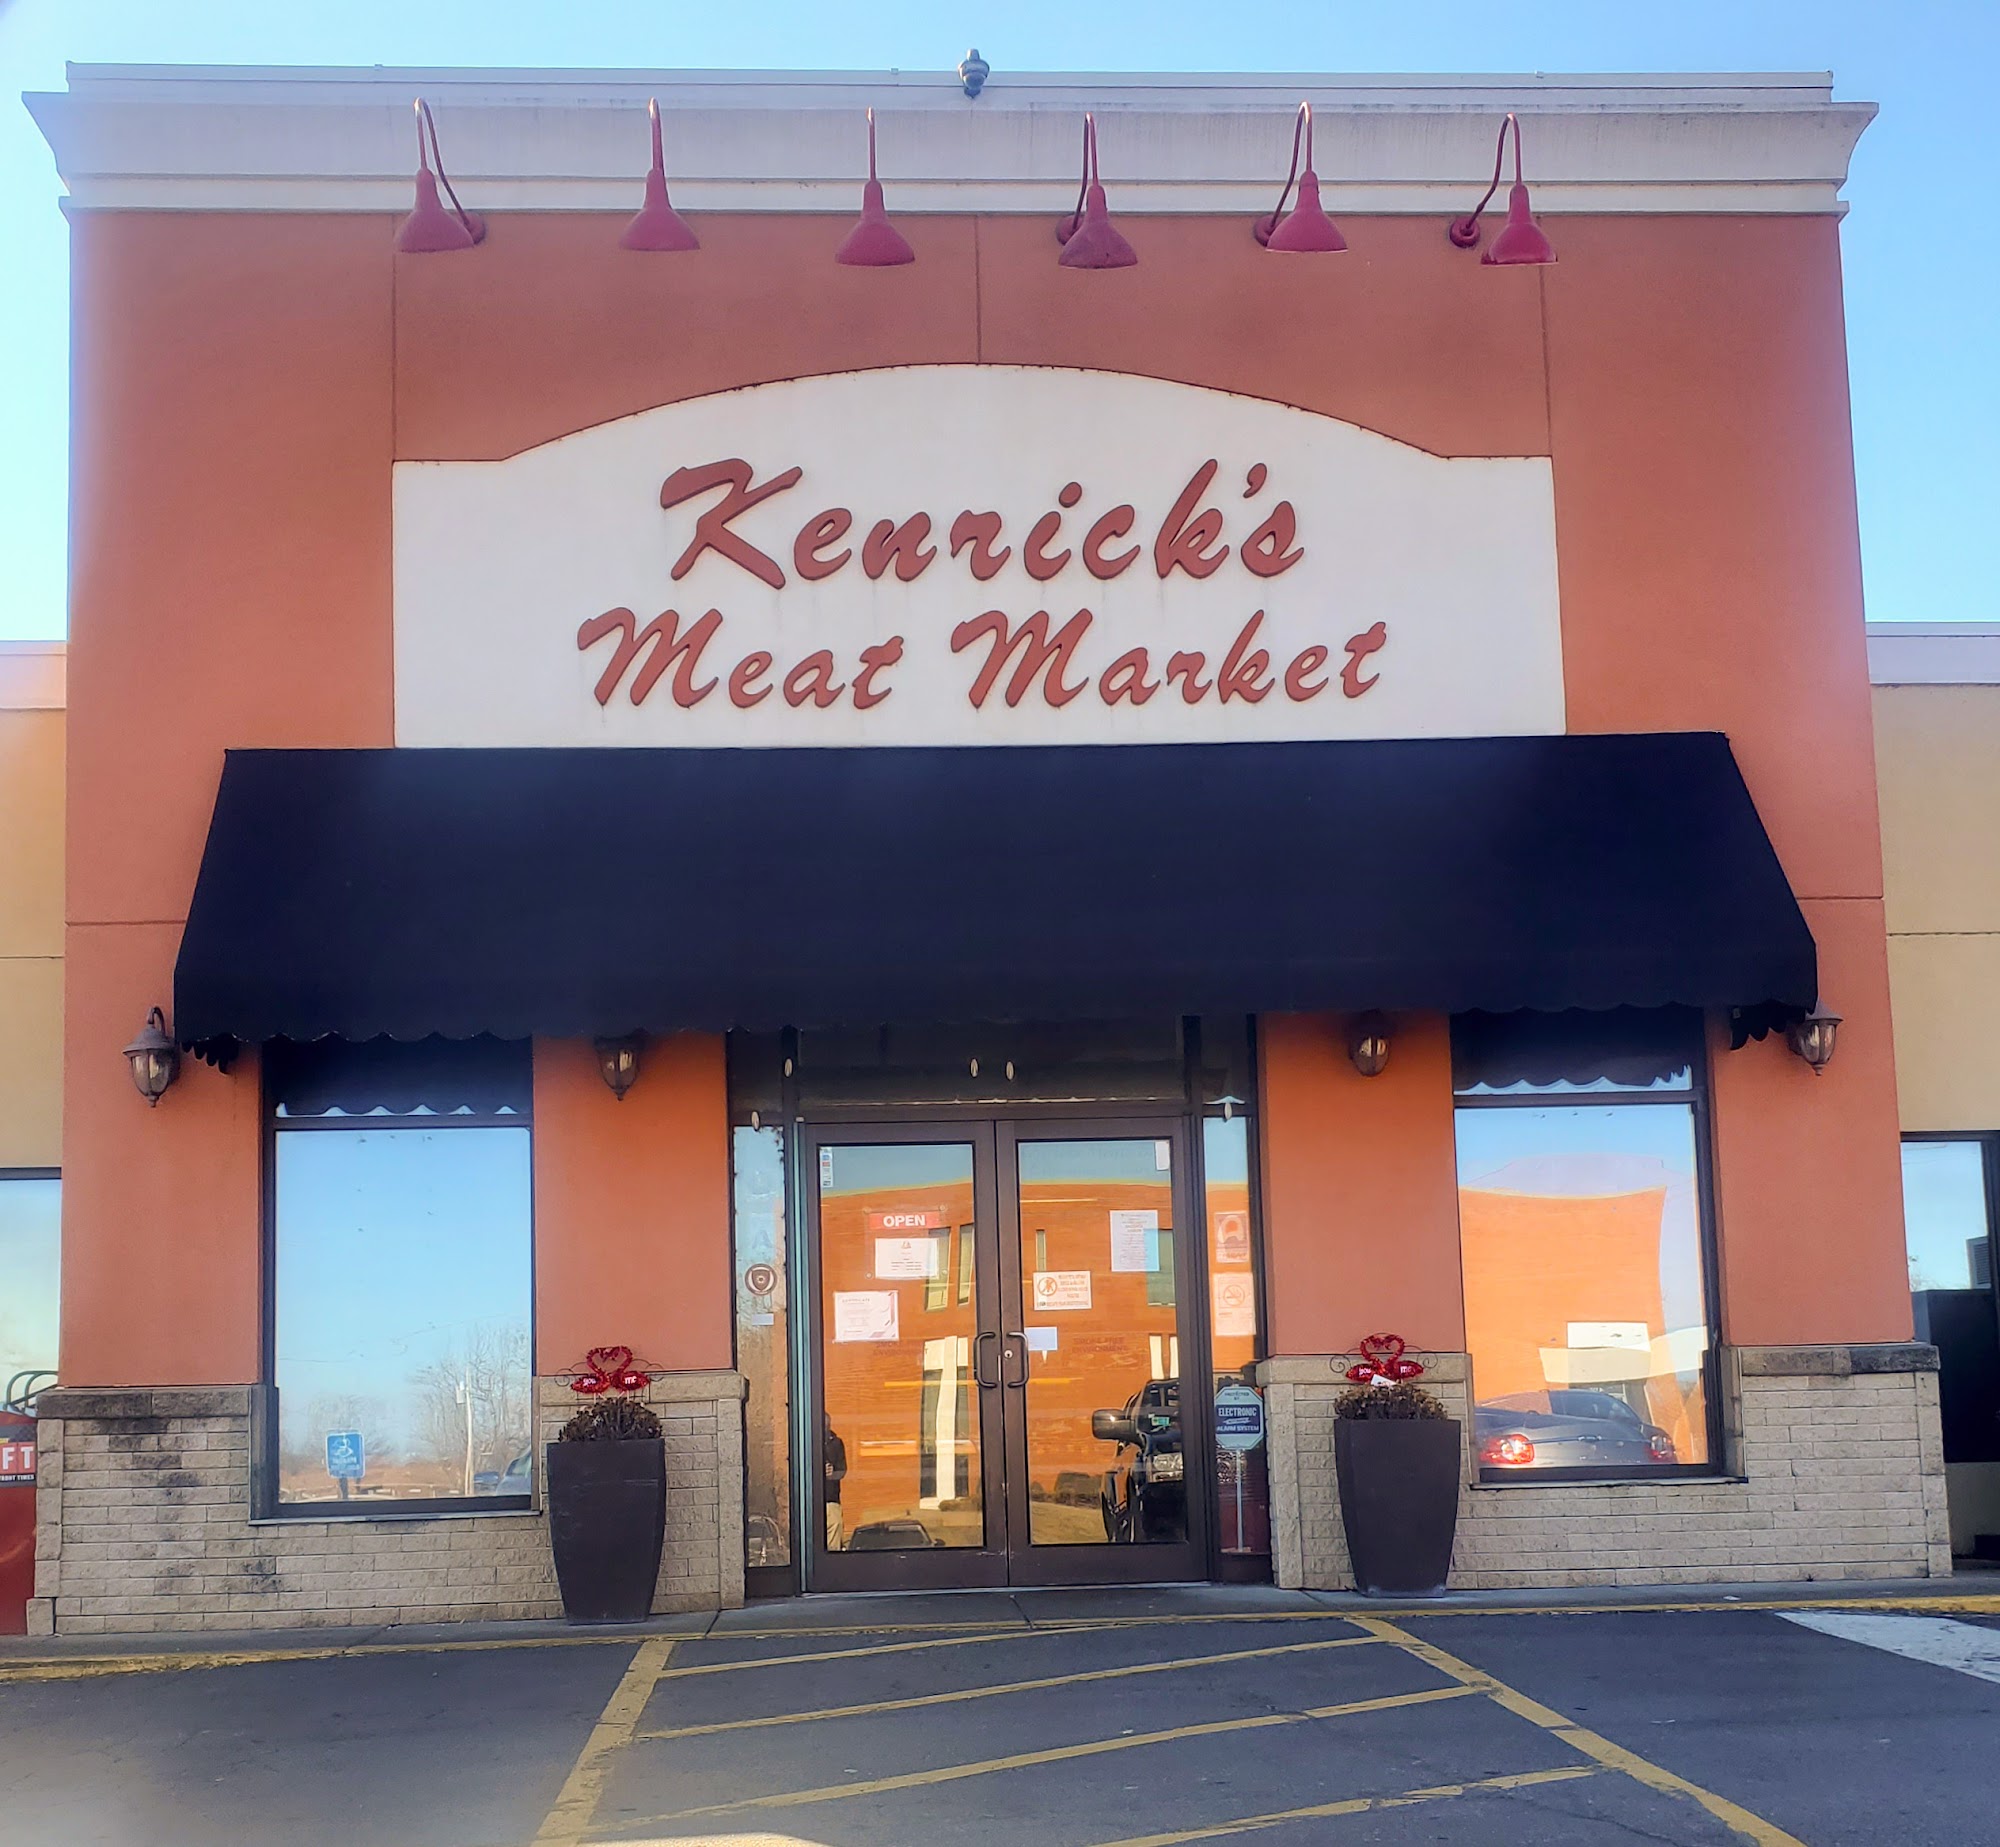 Kenrick's Meats & Catering